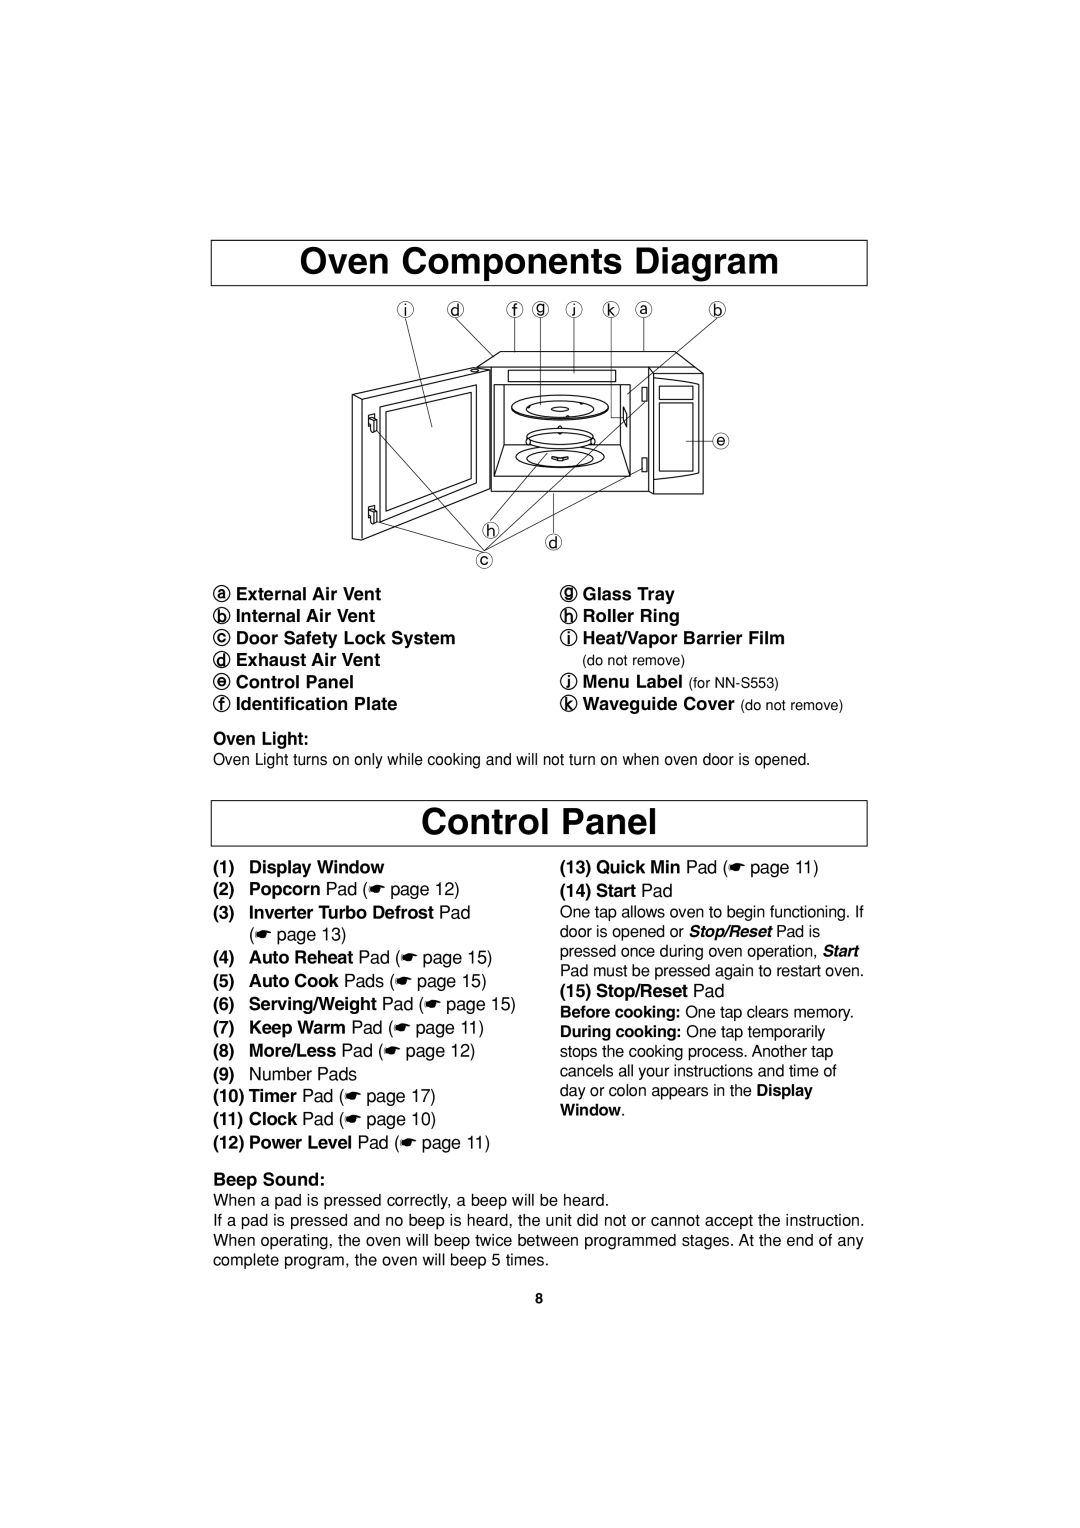 Panasonic NN-S553, NN-S503 important safety instructions Oven Components Diagram, Control Panel 